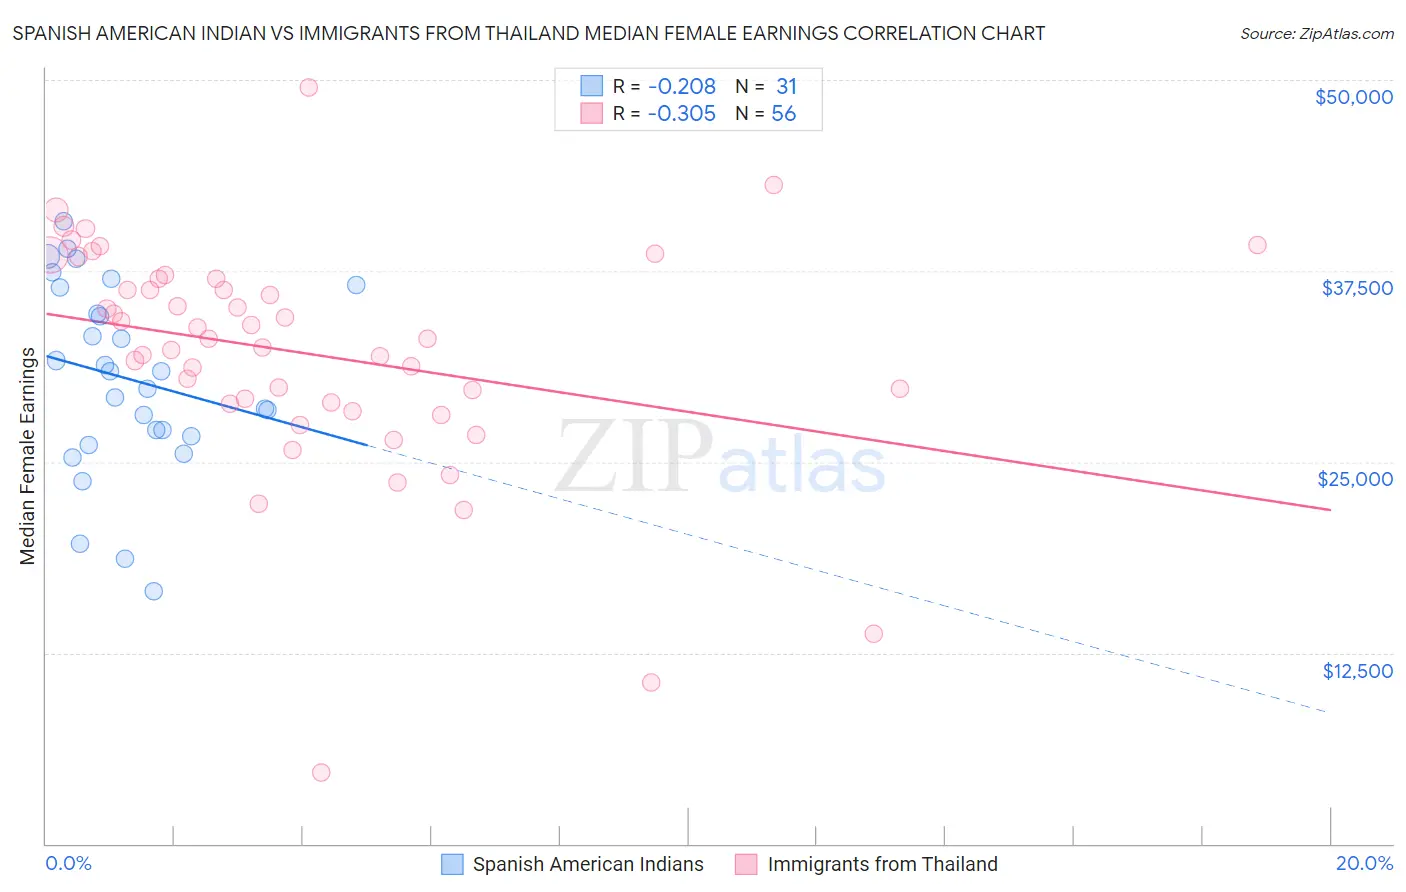 Spanish American Indian vs Immigrants from Thailand Median Female Earnings